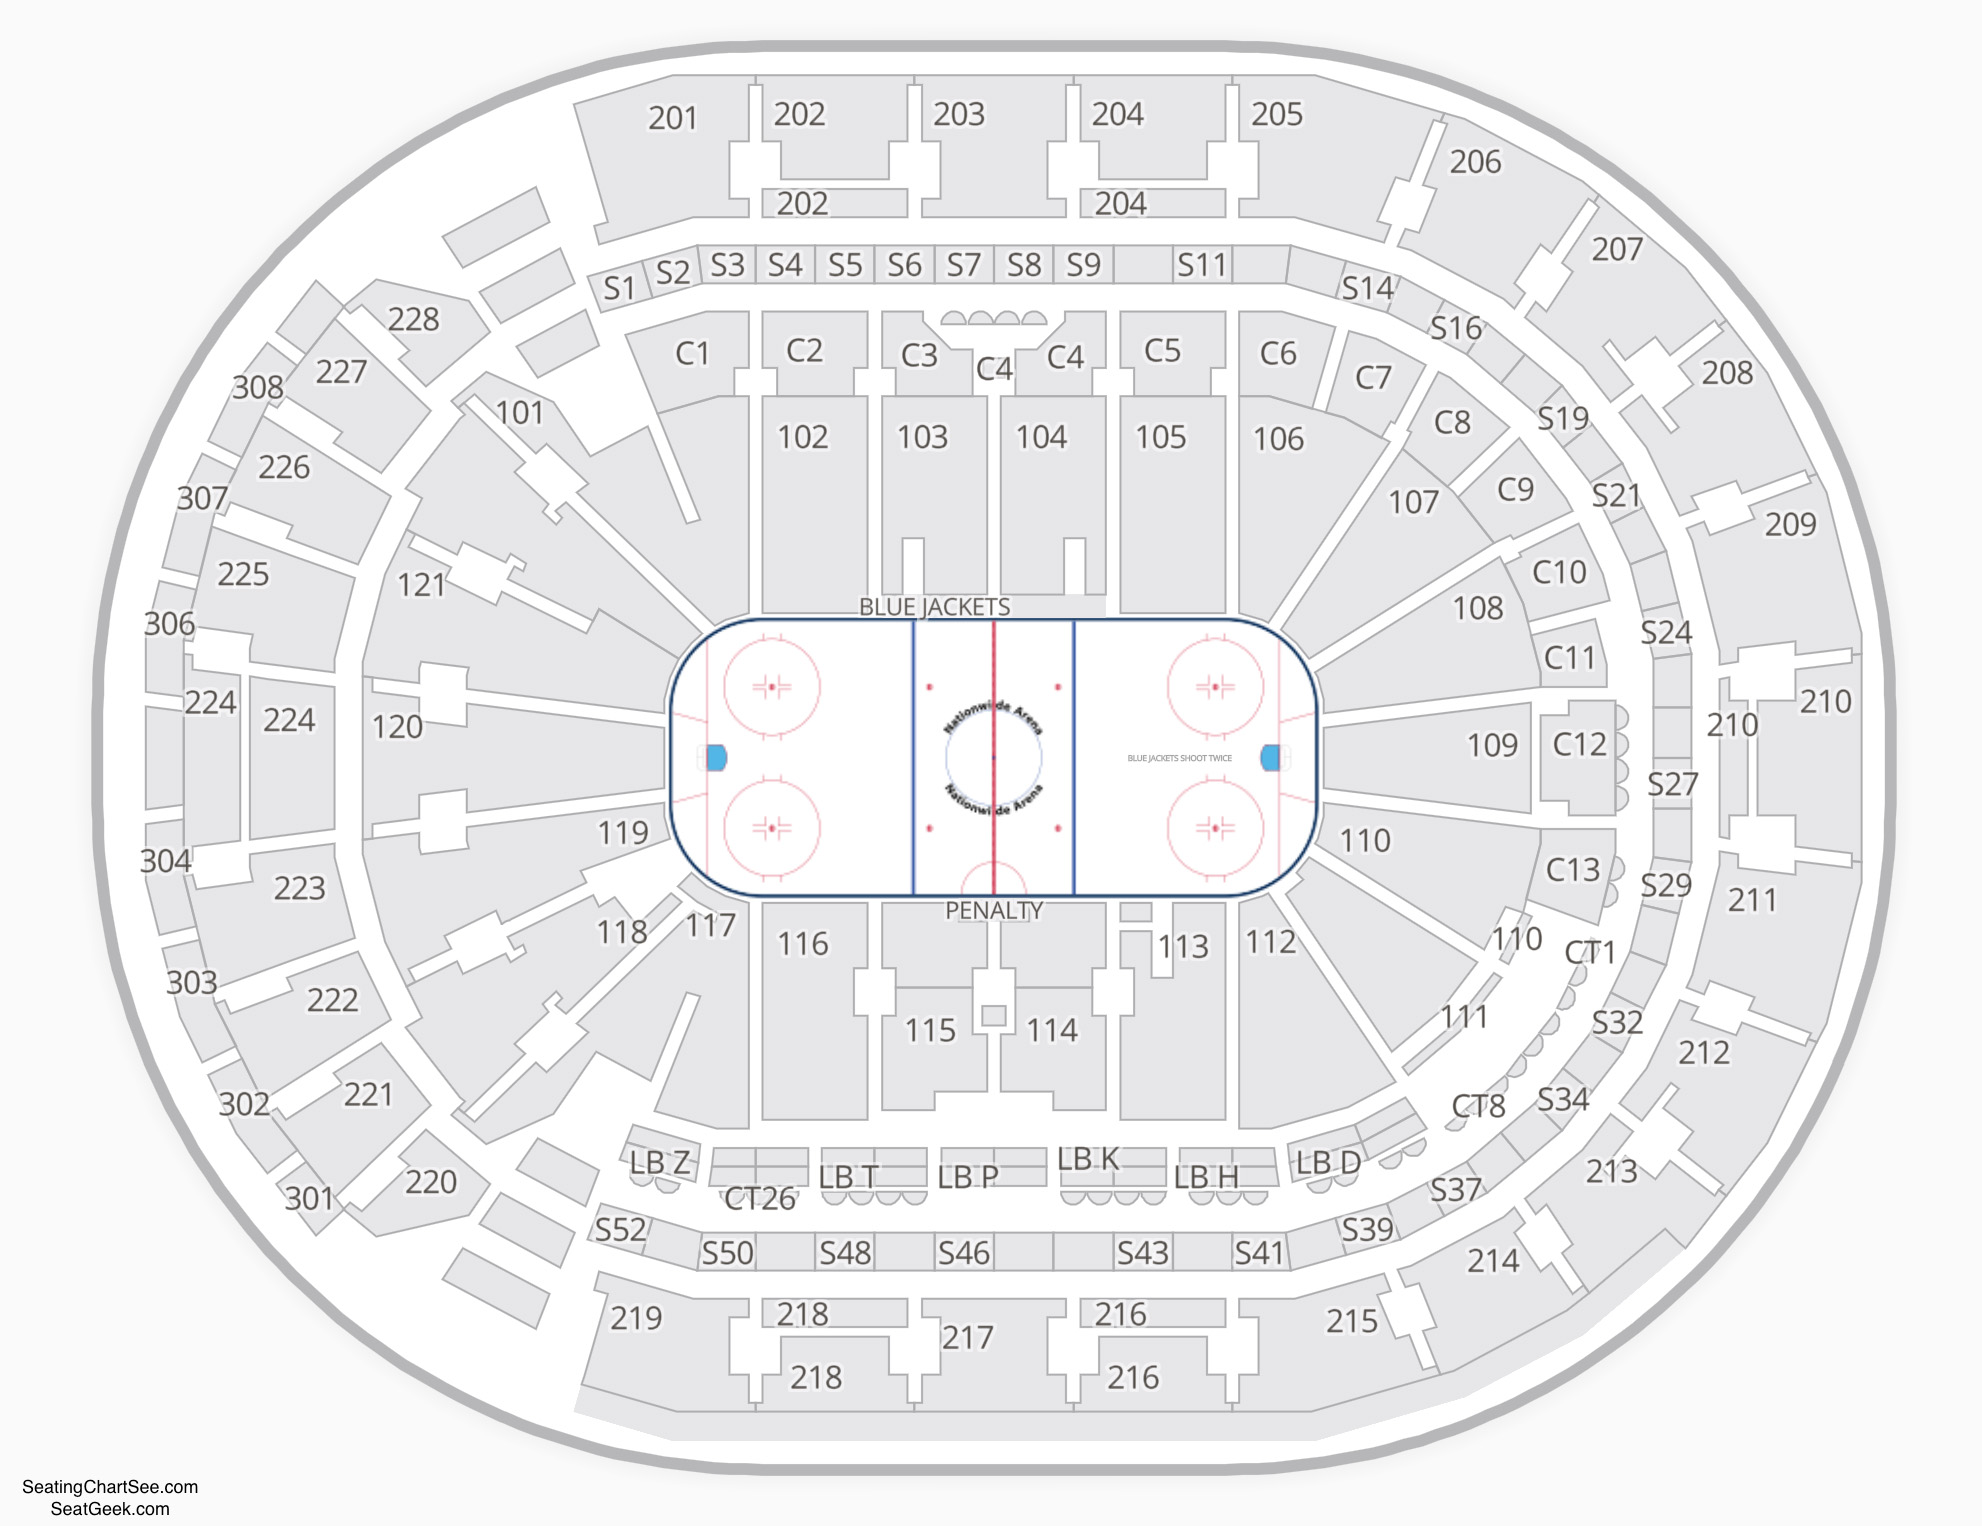 Nationwide Arena Seating Charts Views Games Answers Cheats